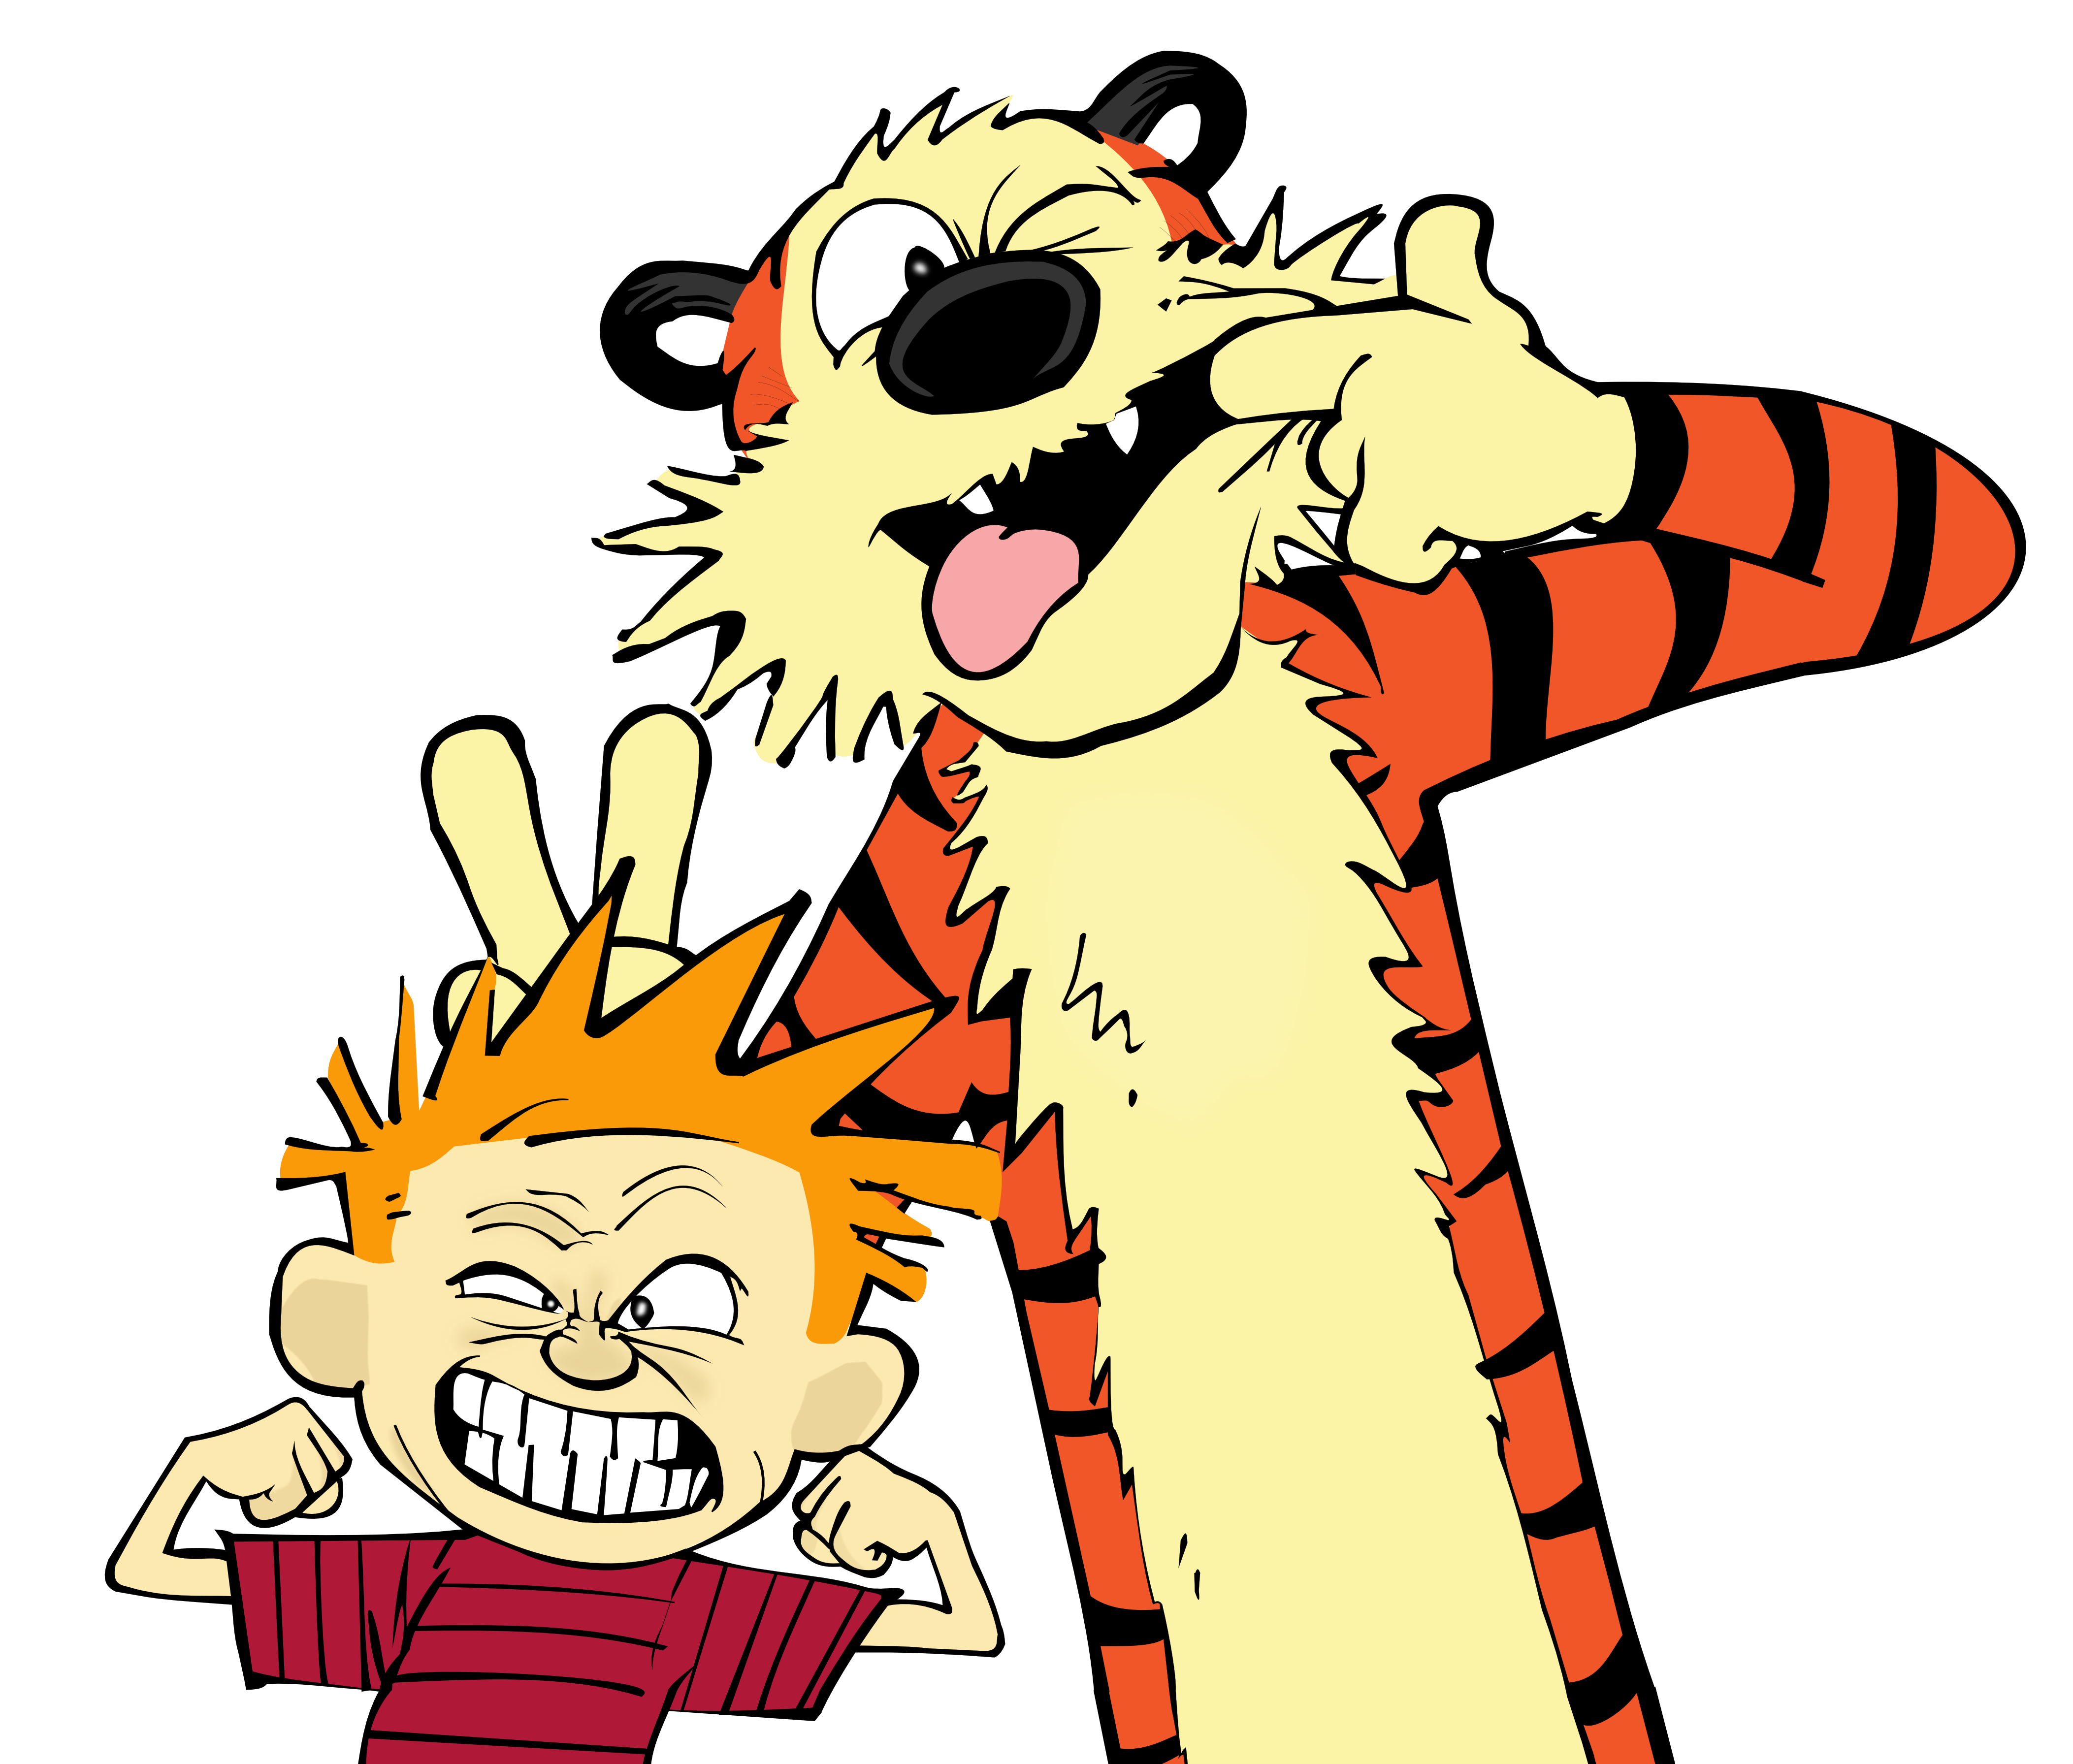 calvin_and_hobbes_by_pmatos1-d73d4gs.png